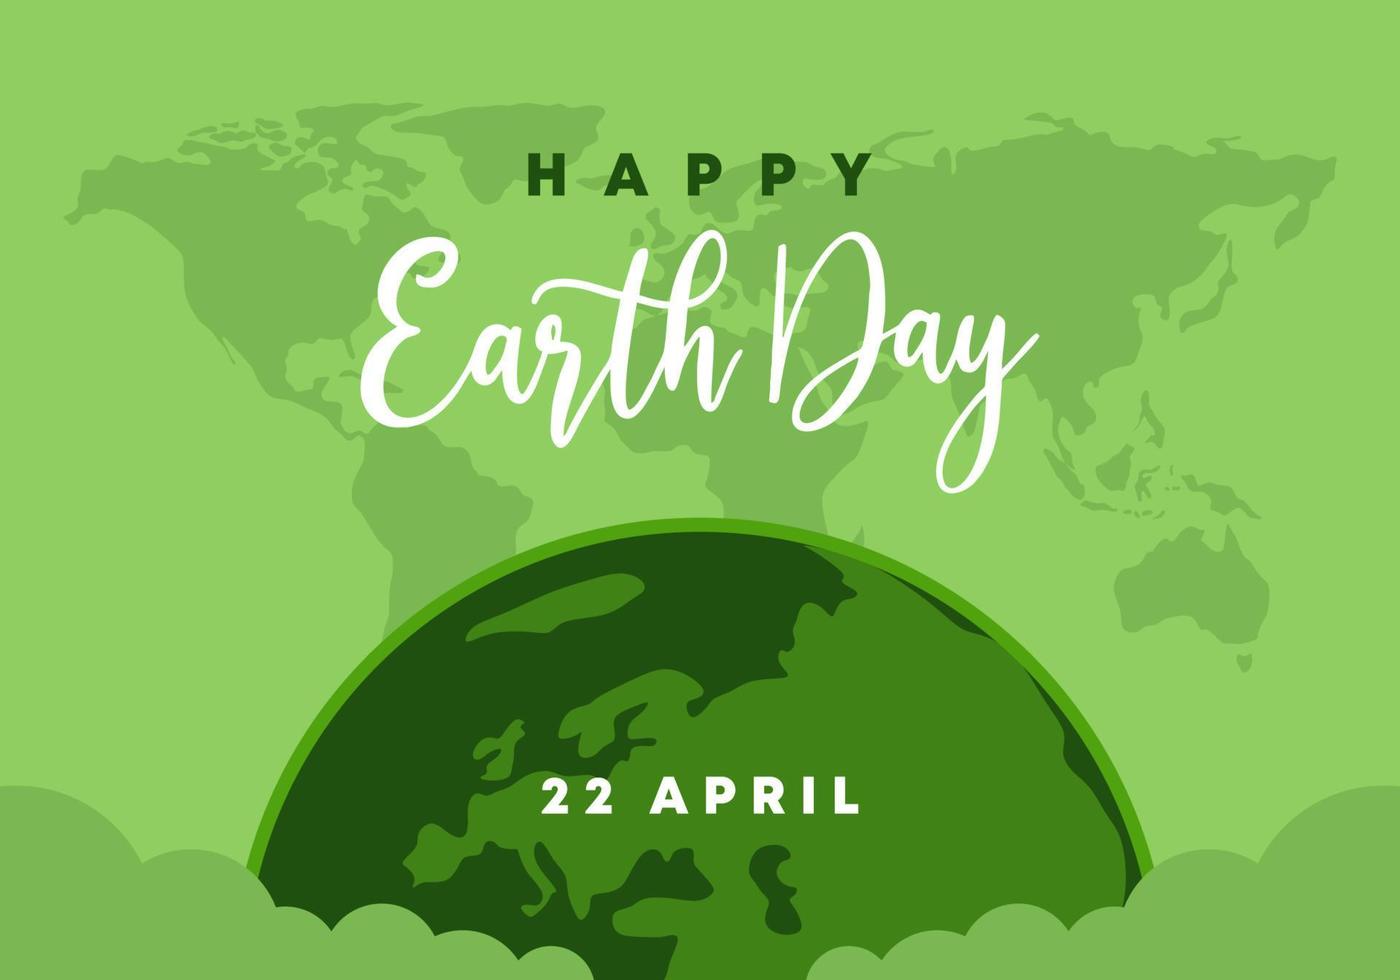 Happy earth day poster with world map celebration on april 22. vector